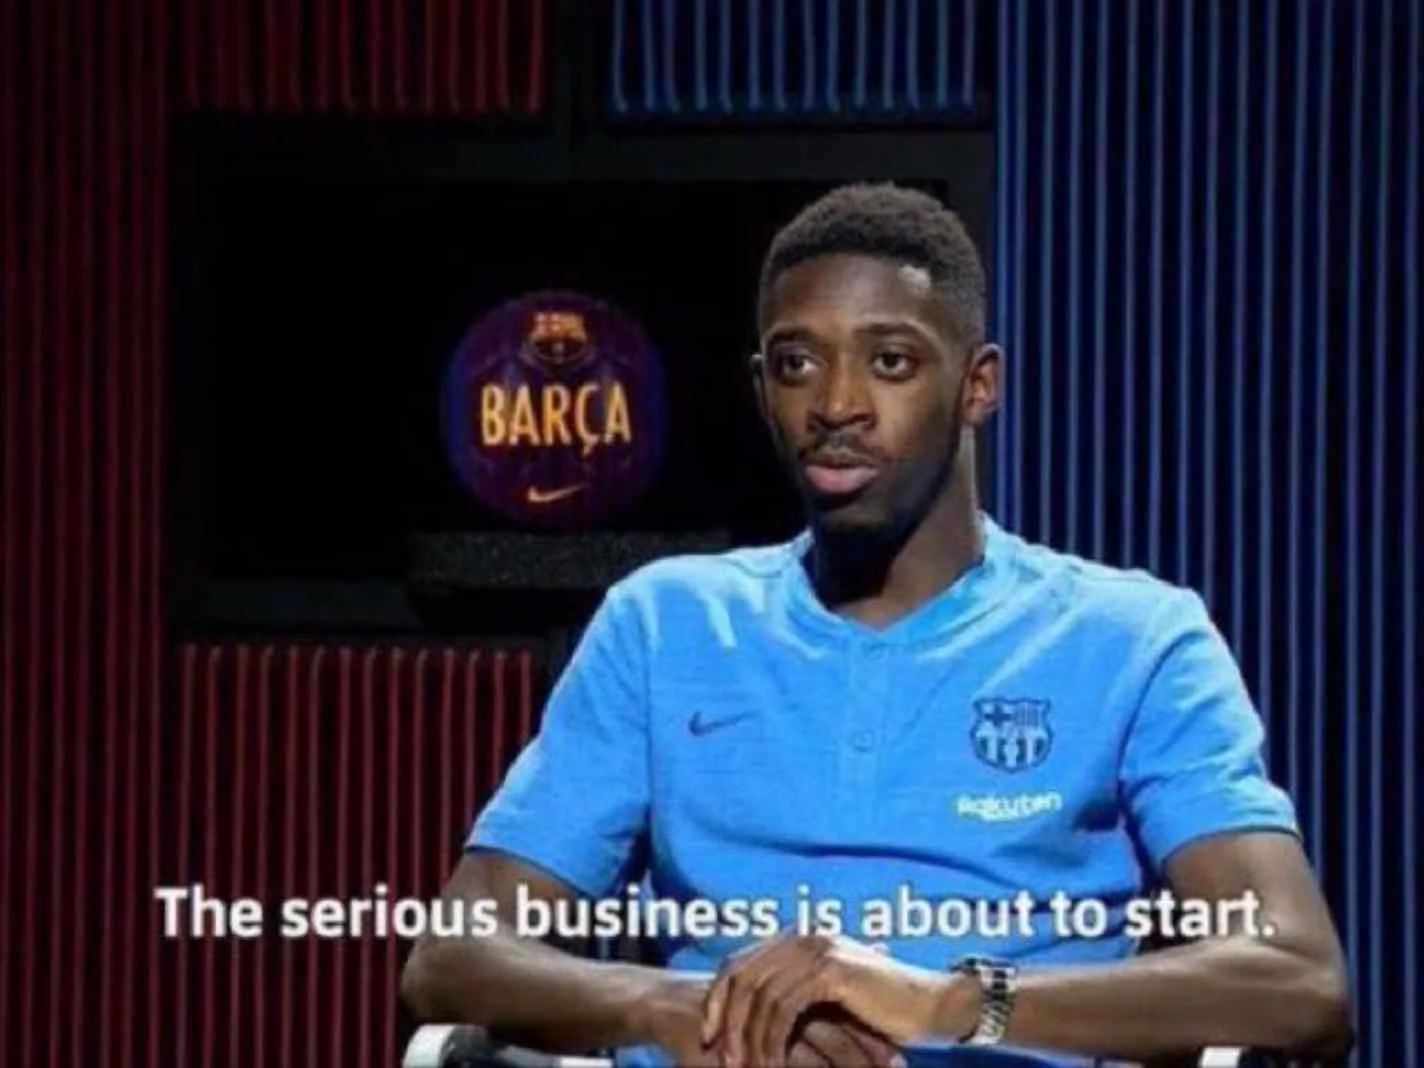 In this image - Ousmane Dembele, along with the caption 'The serious business is about to start'.